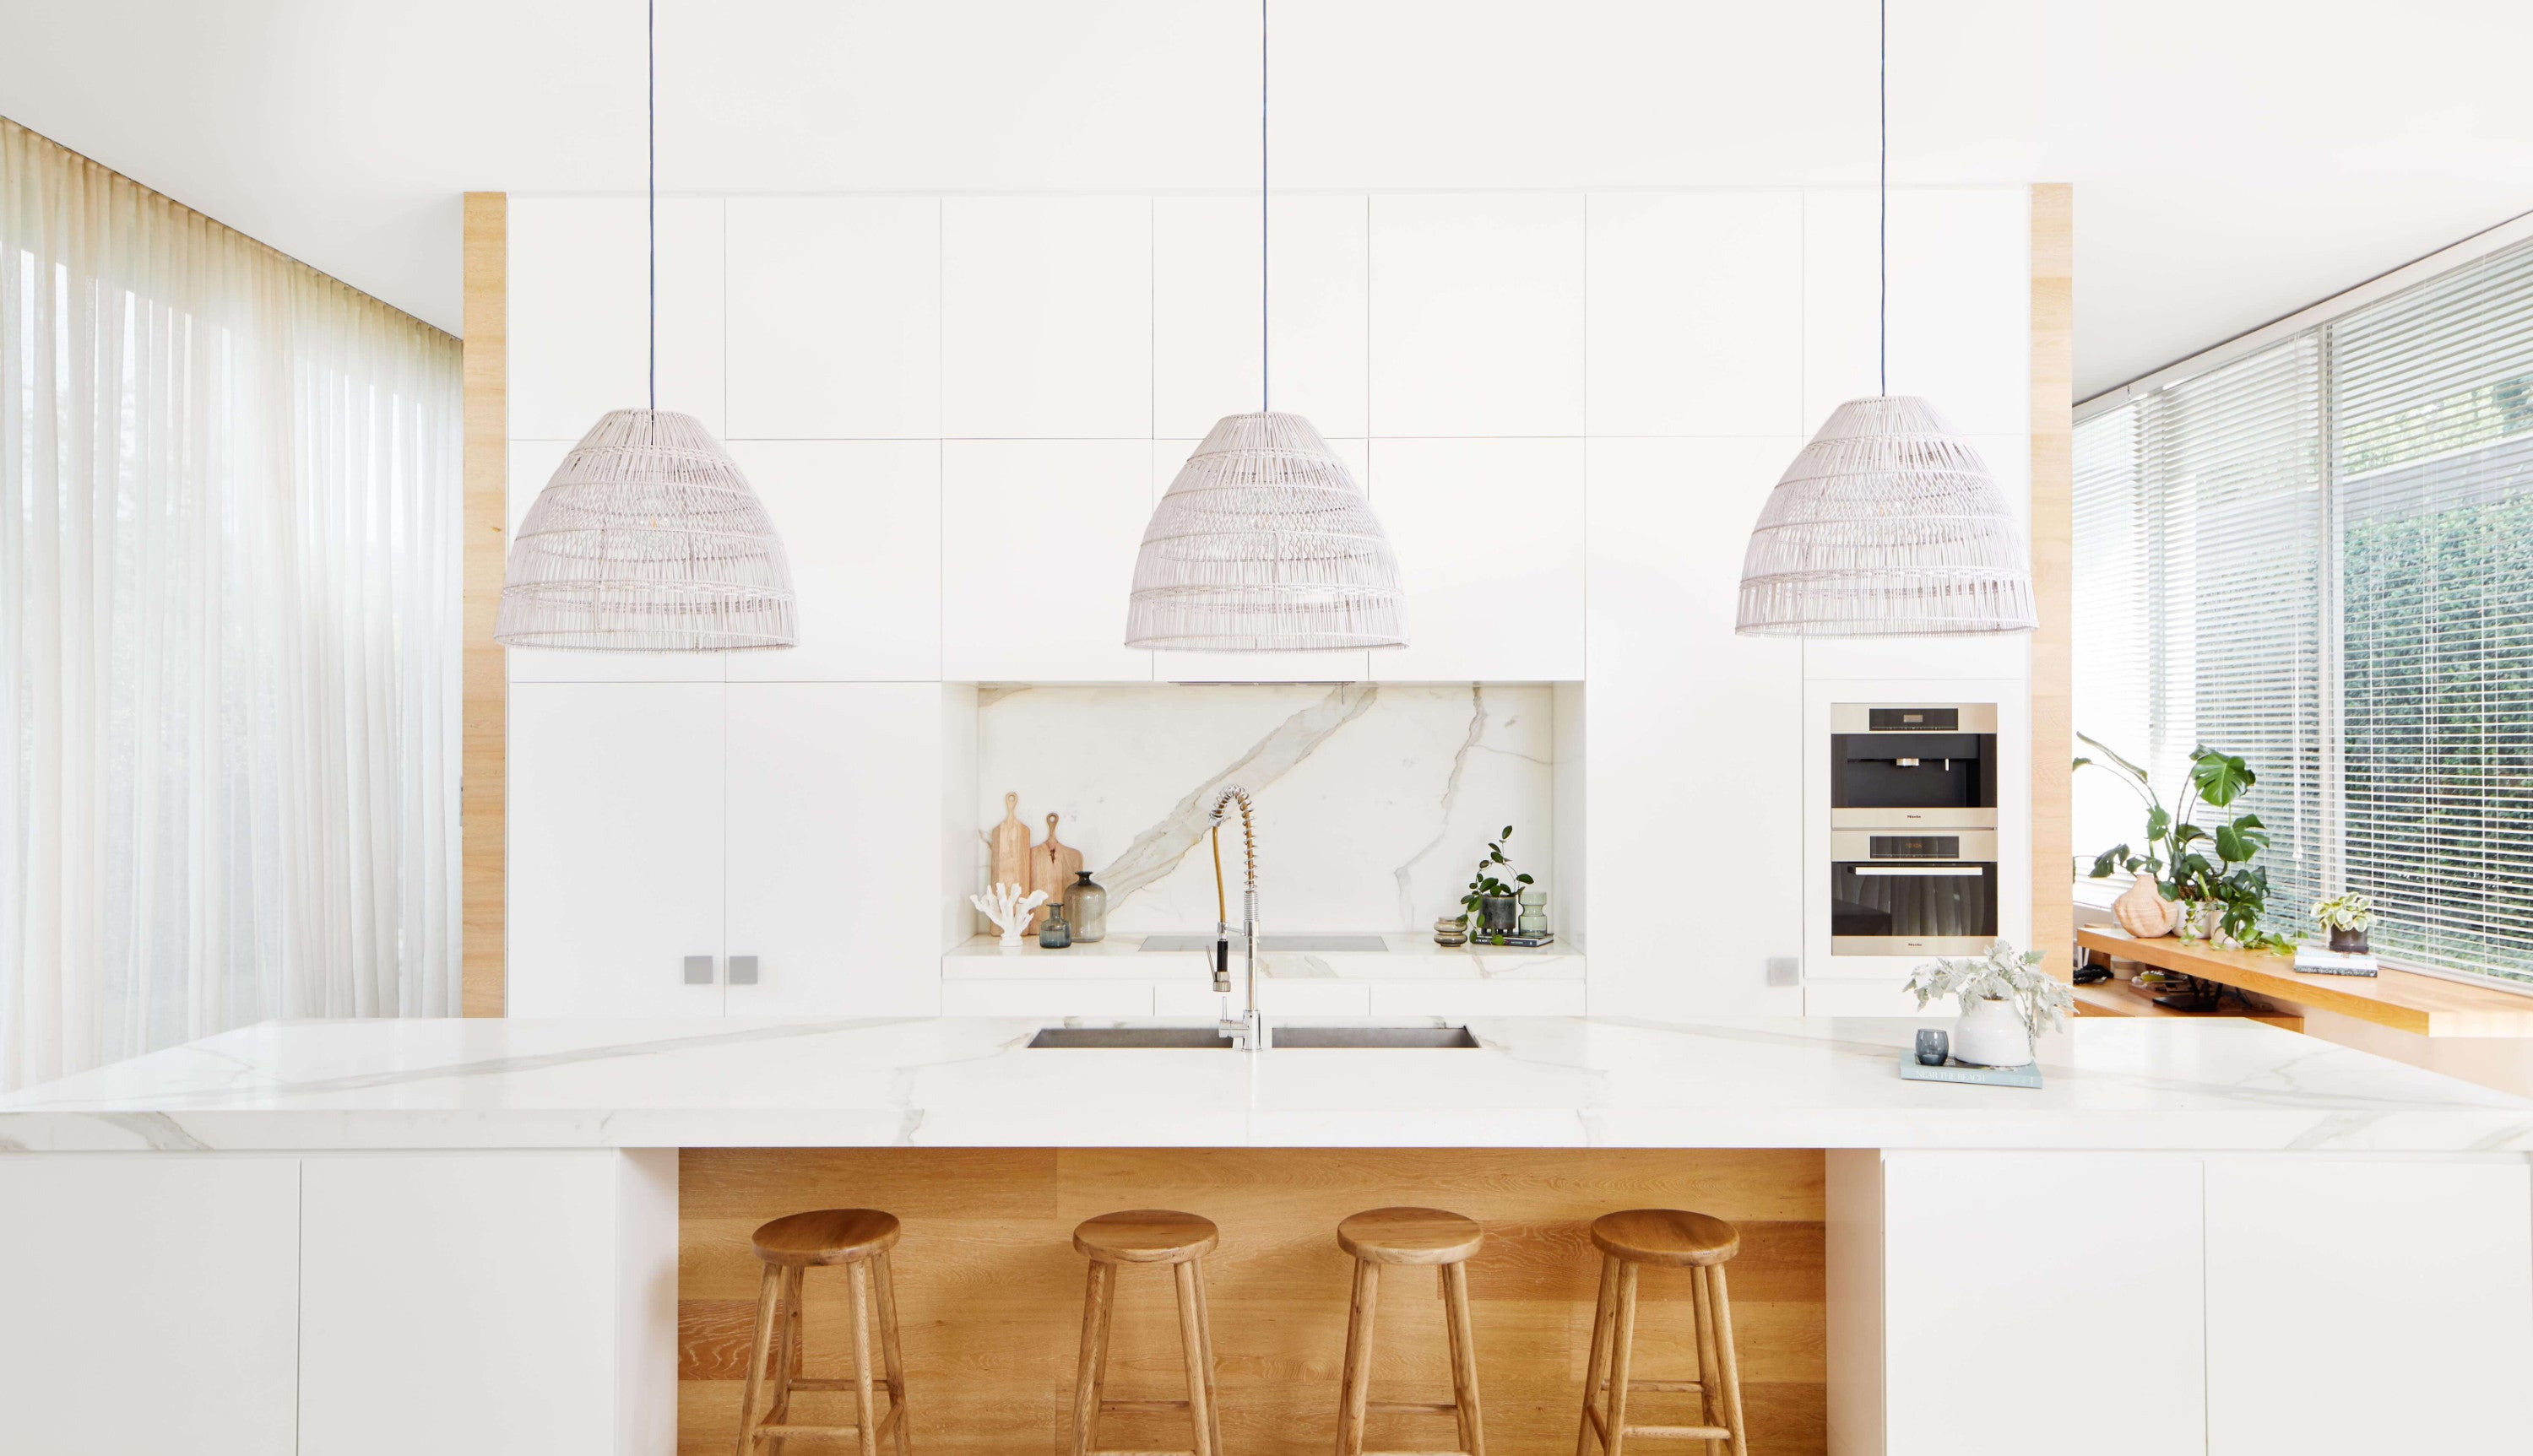 Three white Marlo sustainable pendant lights hang over a large marble kitchen island bench.